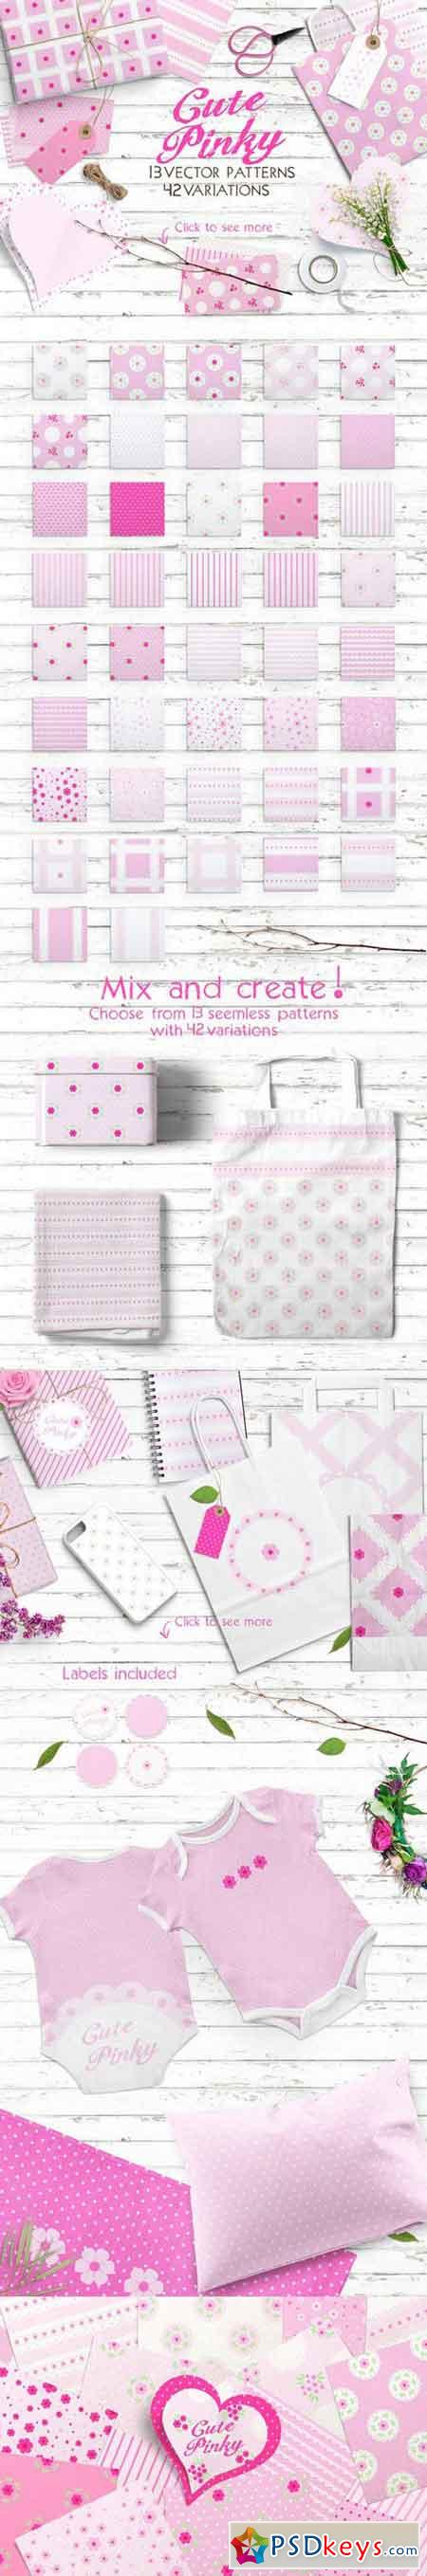 Cute Pinky Patterns Pack 735441